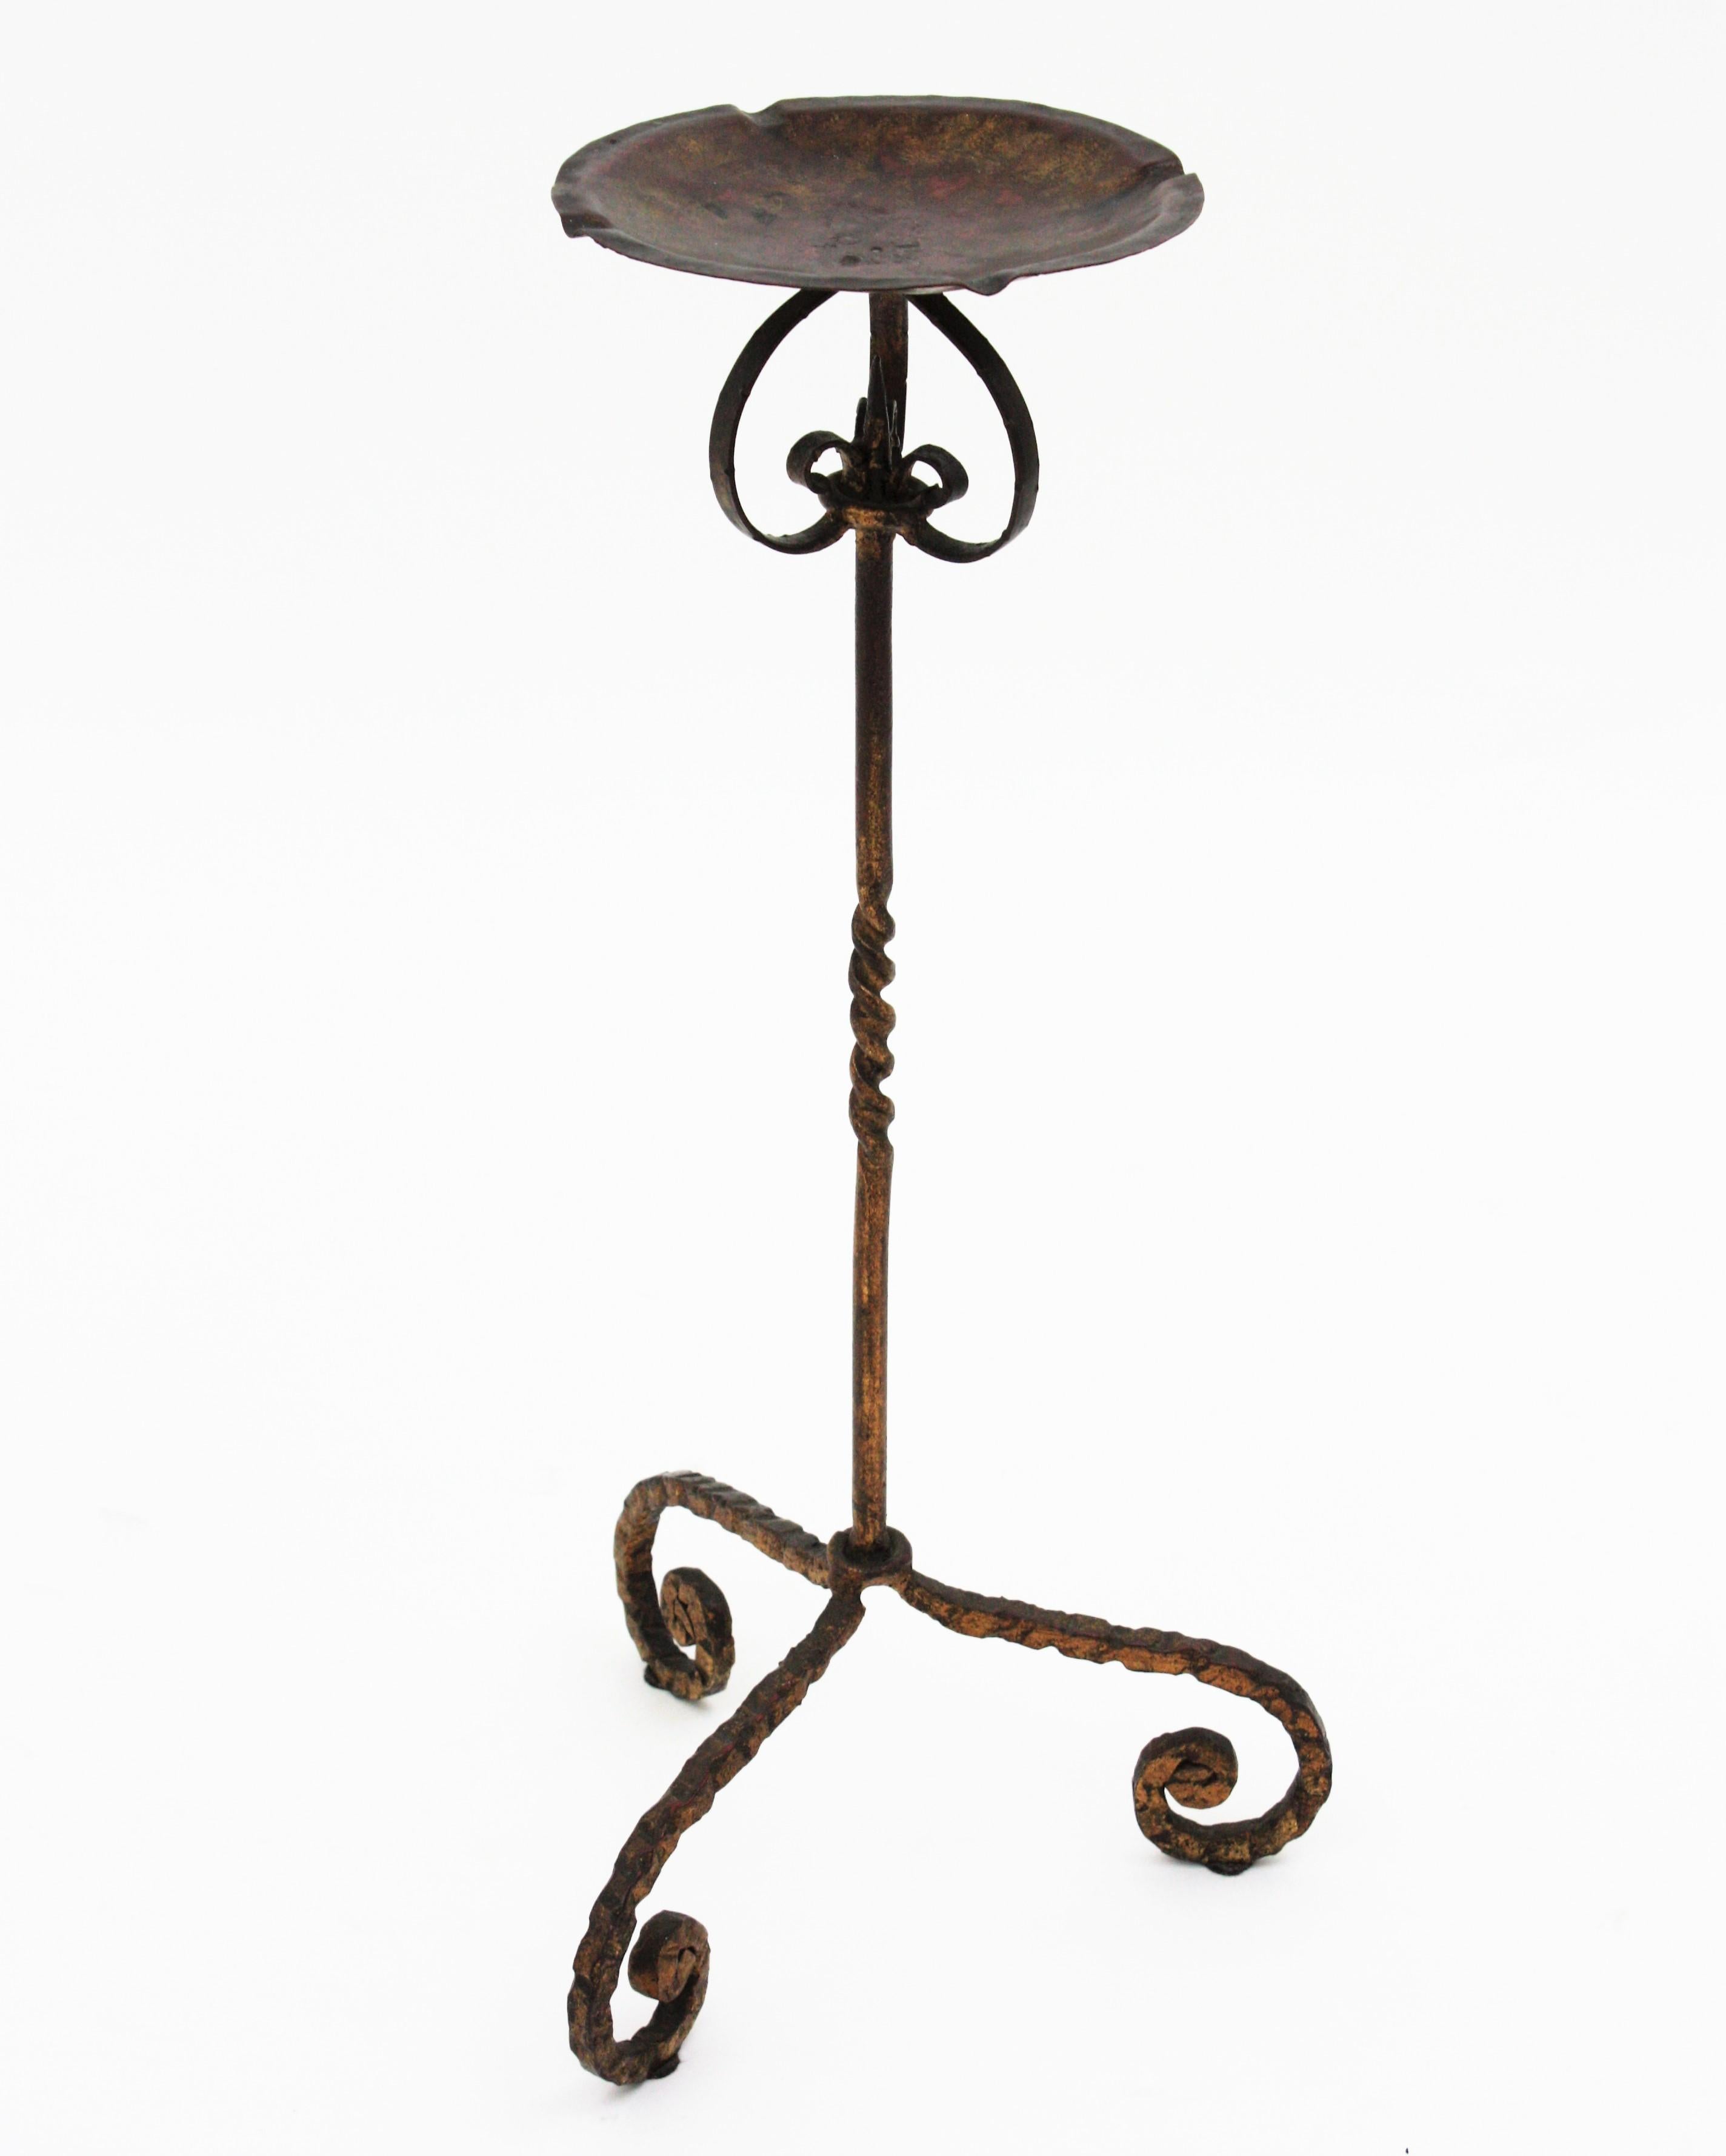 Spanish Drinks Table / Side Table / Floor Ashtray, Wrought Iron, 1940s For Sale 2